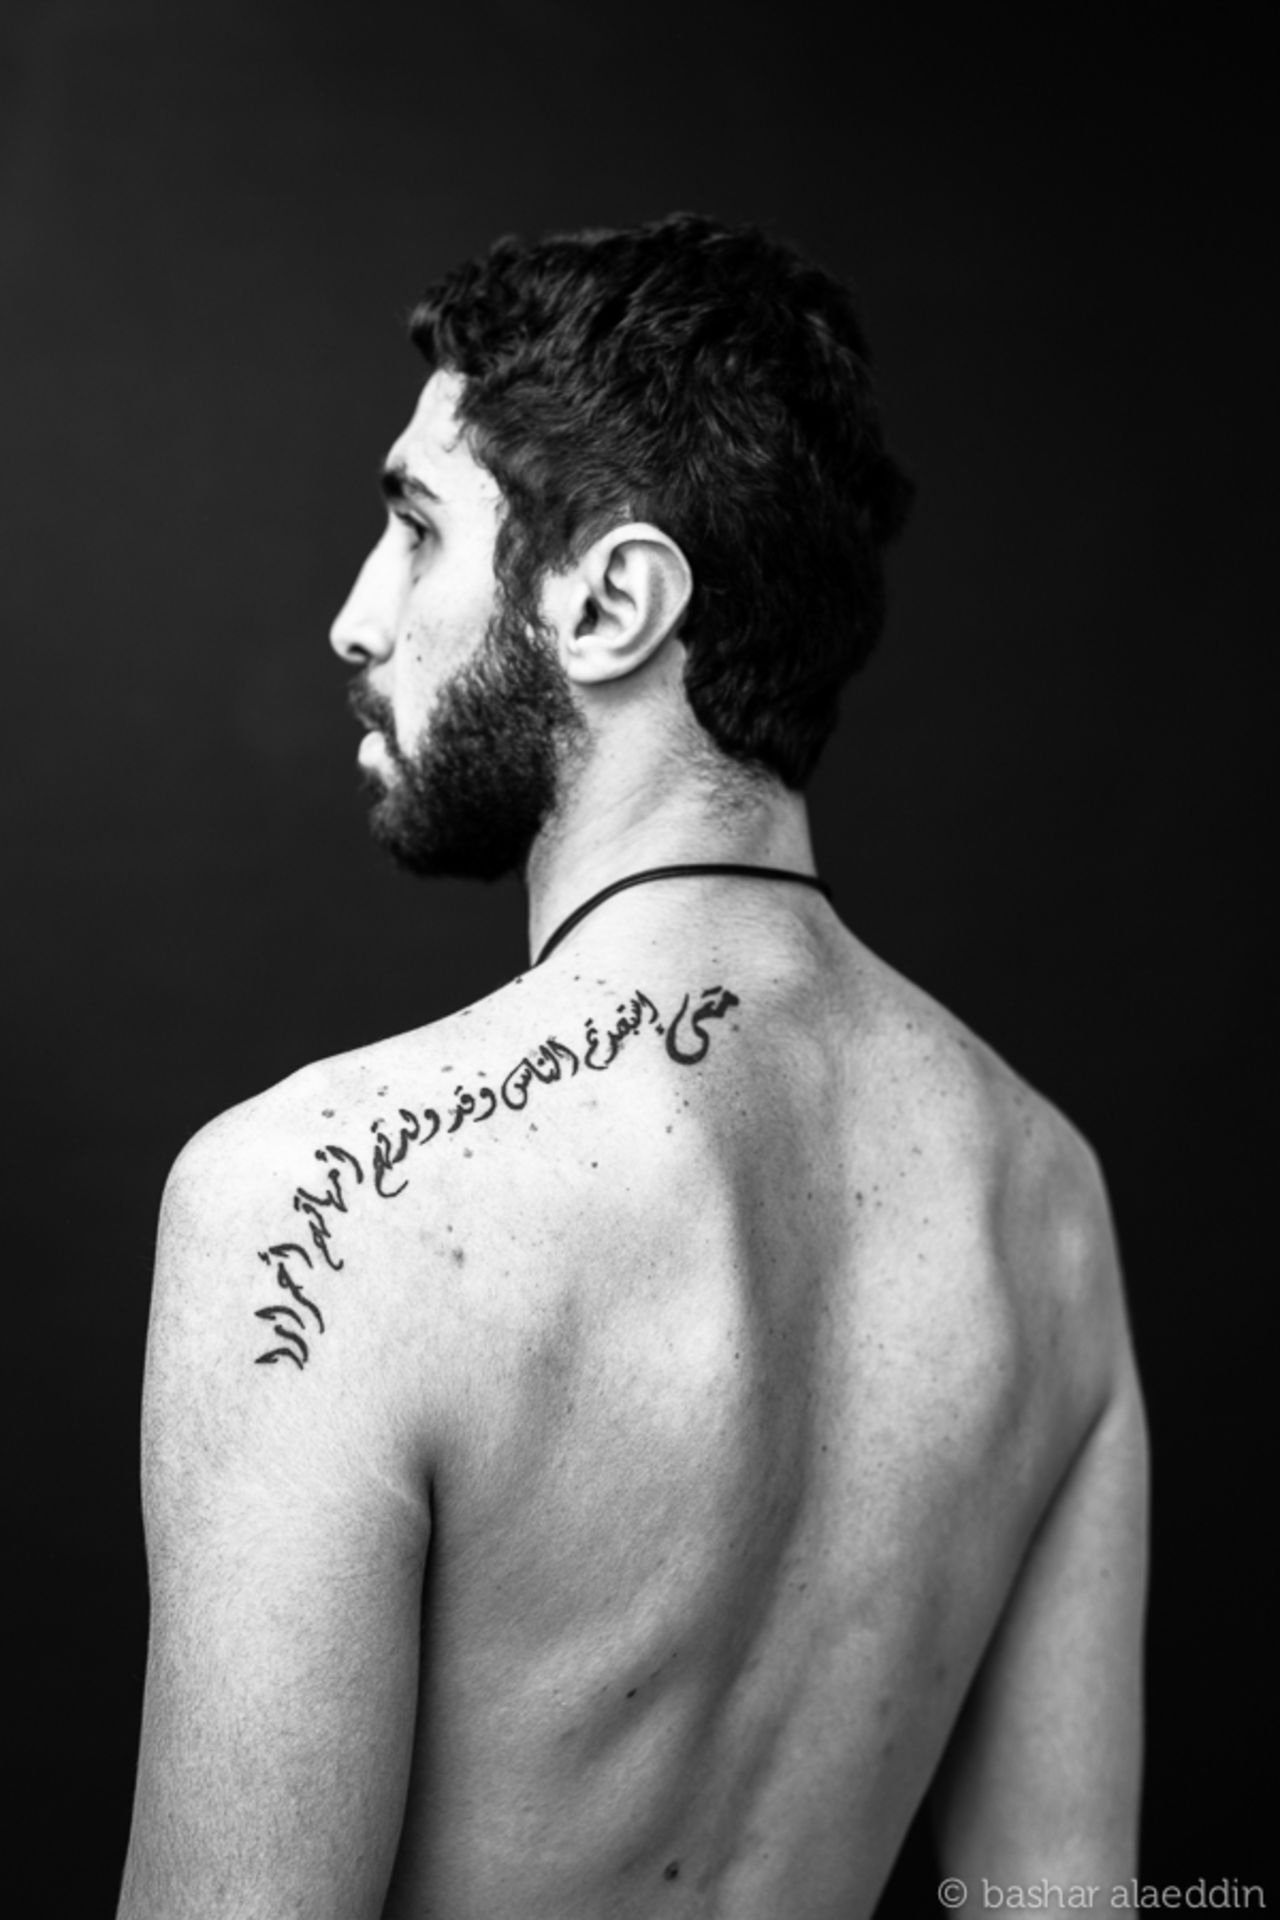 Abed Al Razzak's tattoo "By which right did you enslave people, when they were born free by their mothers?"  